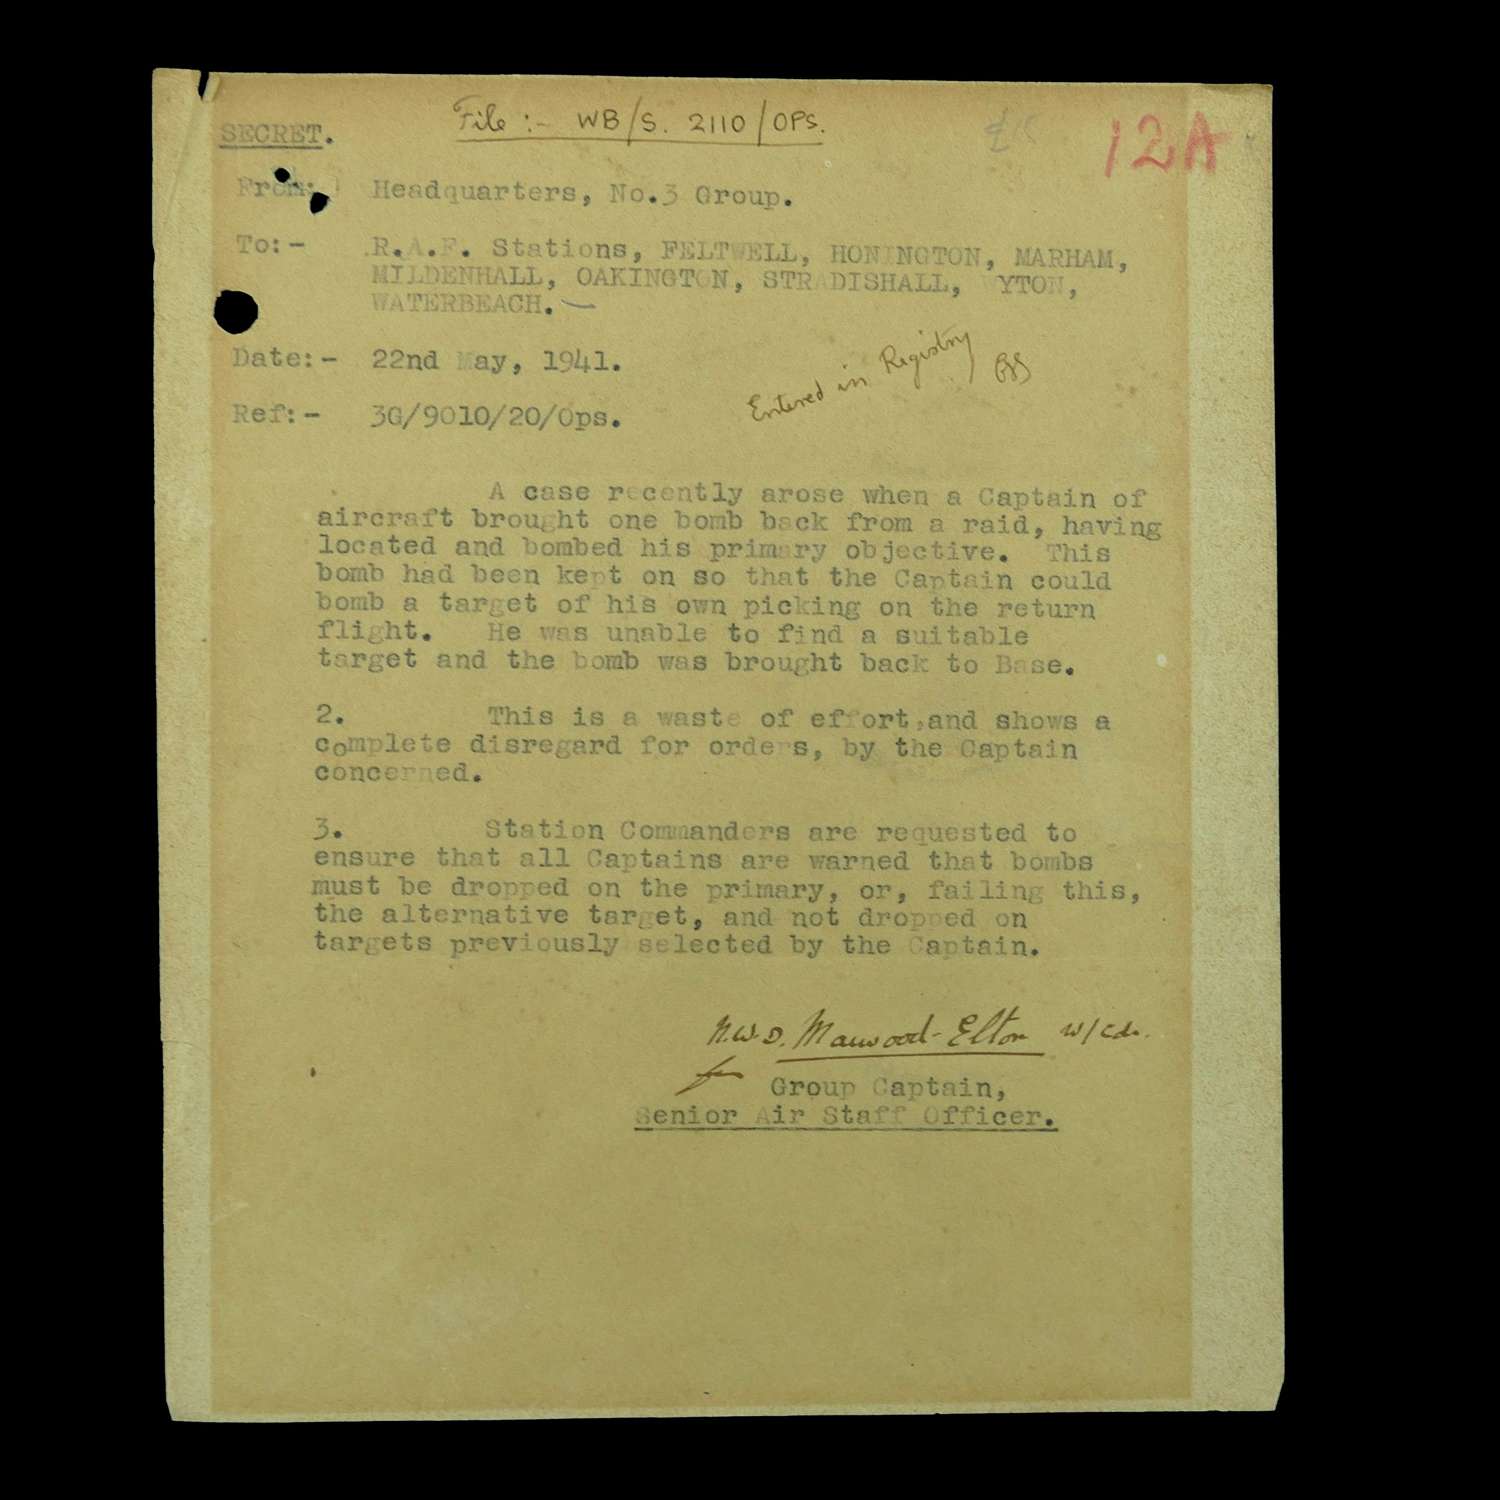 RAF Bomber Command letter re retaining bombs after a raid, c.1941